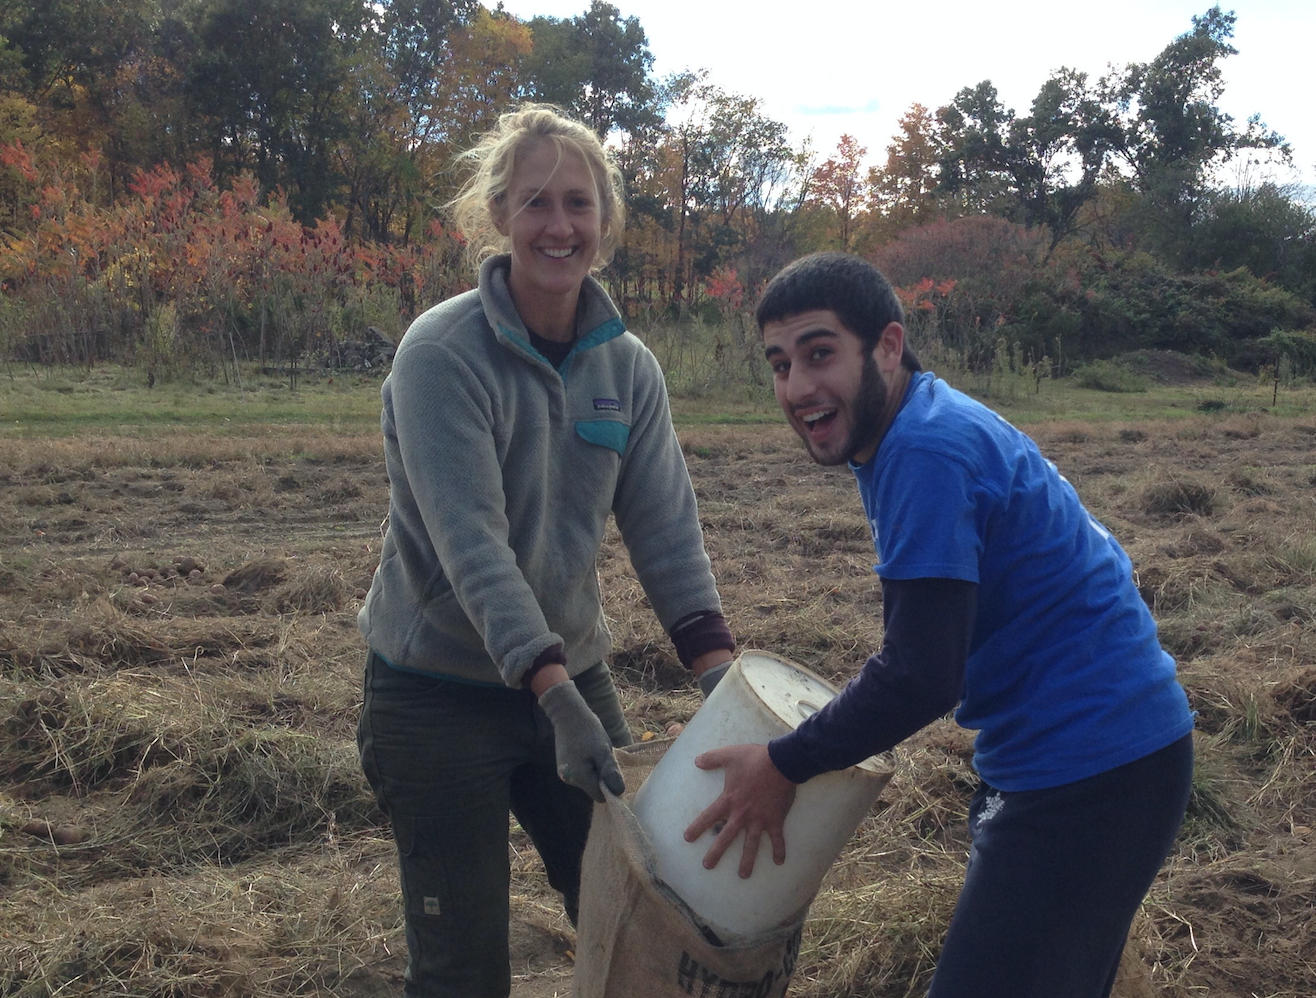 UMass requires all club players to perform community service. Captain Ben Sadok helps Ultiworld's Player of the Year Leila Tunnell pick potatoes at Brookfield Farm in Amherst. Bonding=buy-in.